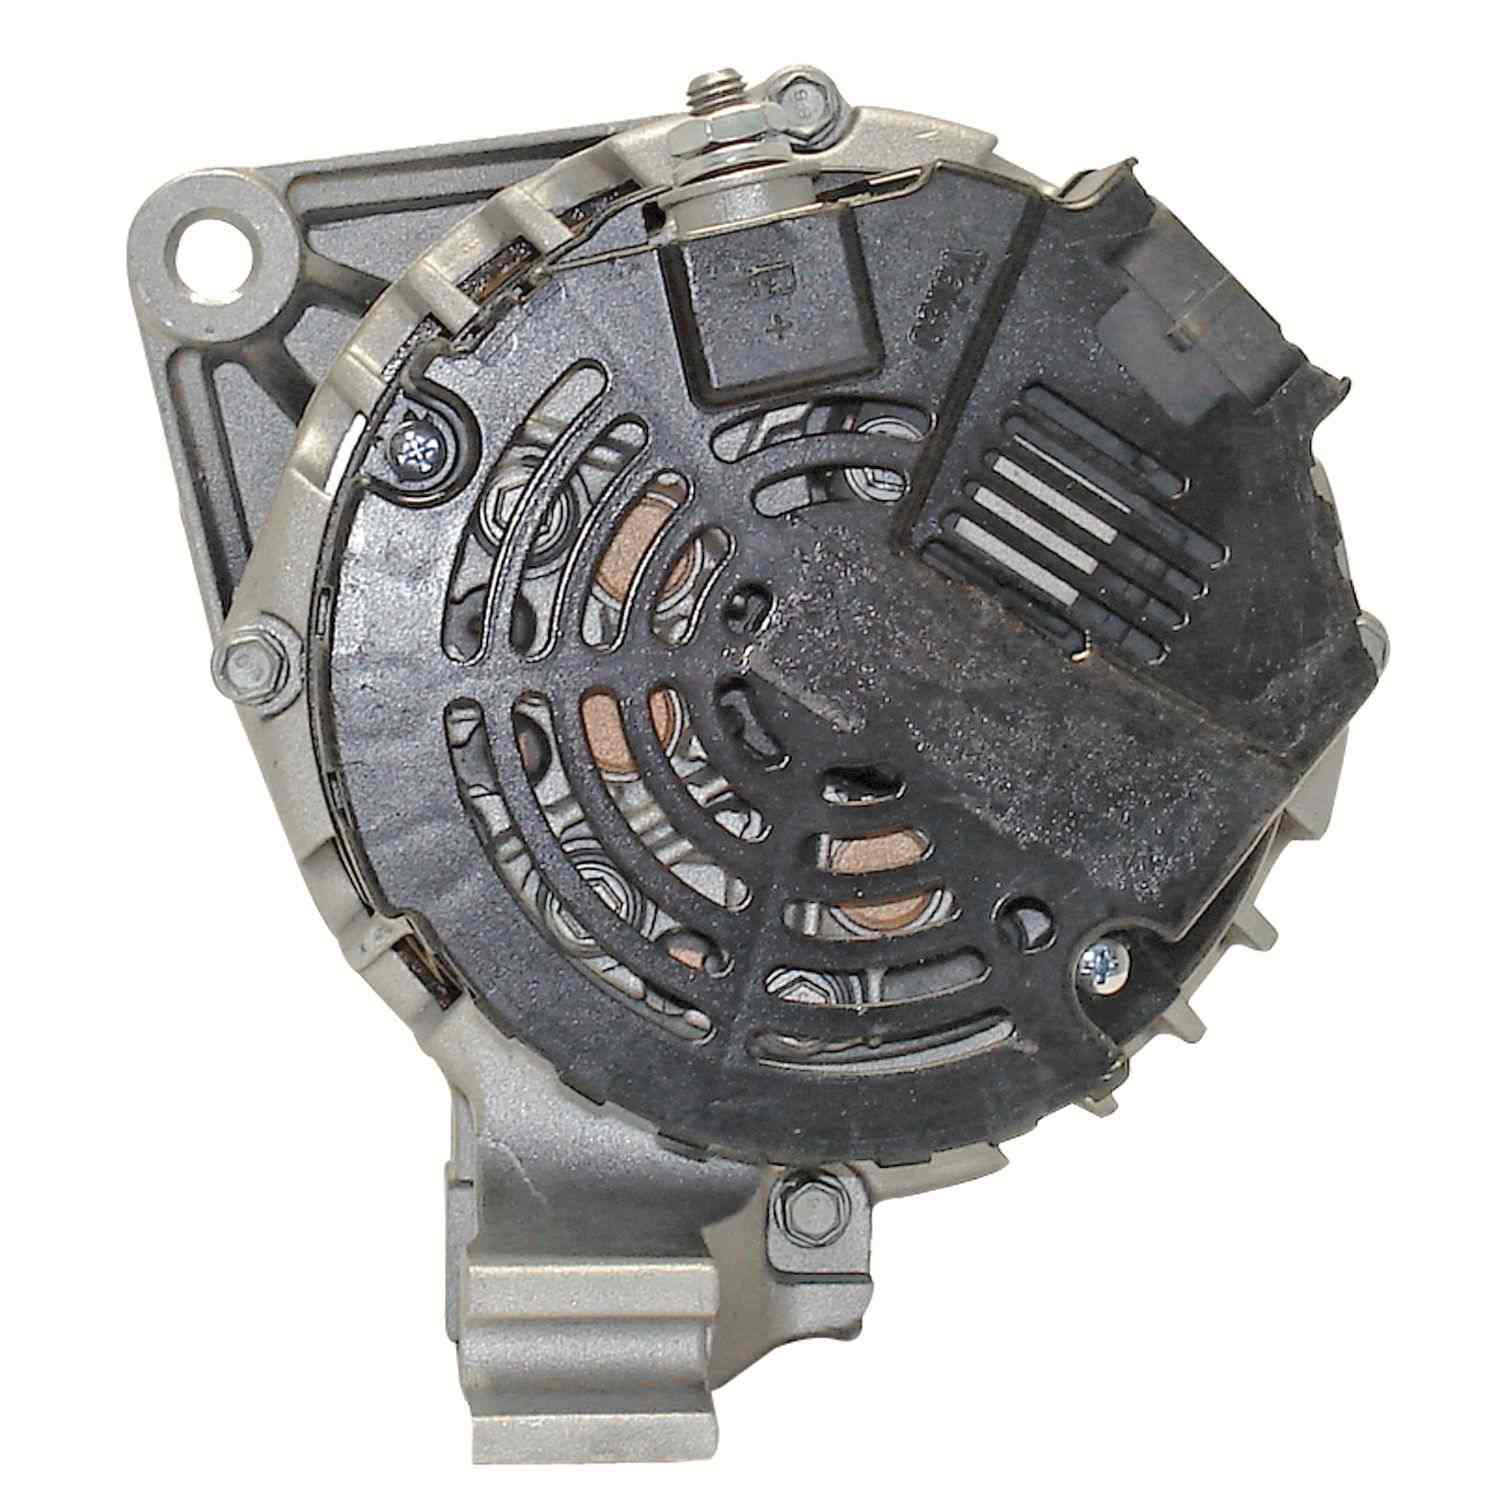 ACDELCO GOLD/PROFESSIONAL - Reman Alternator - DCC 334-1467A